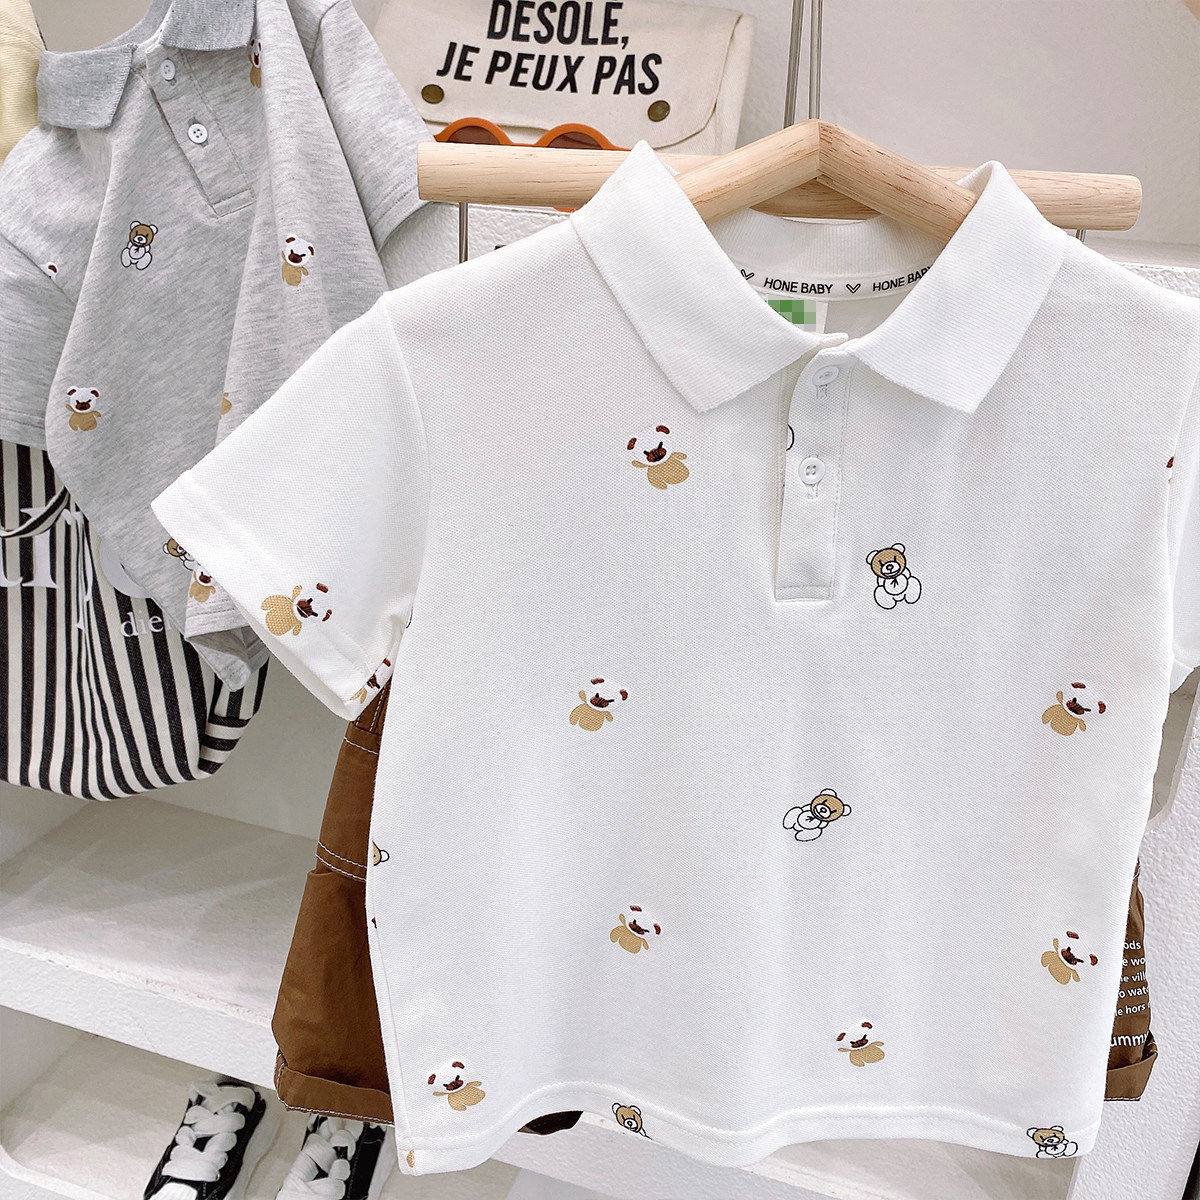 Boys short-sleeved polo shirt T-shirt summer summer clothing baby children's clothing baby cotton half-sleeved fashionable tops